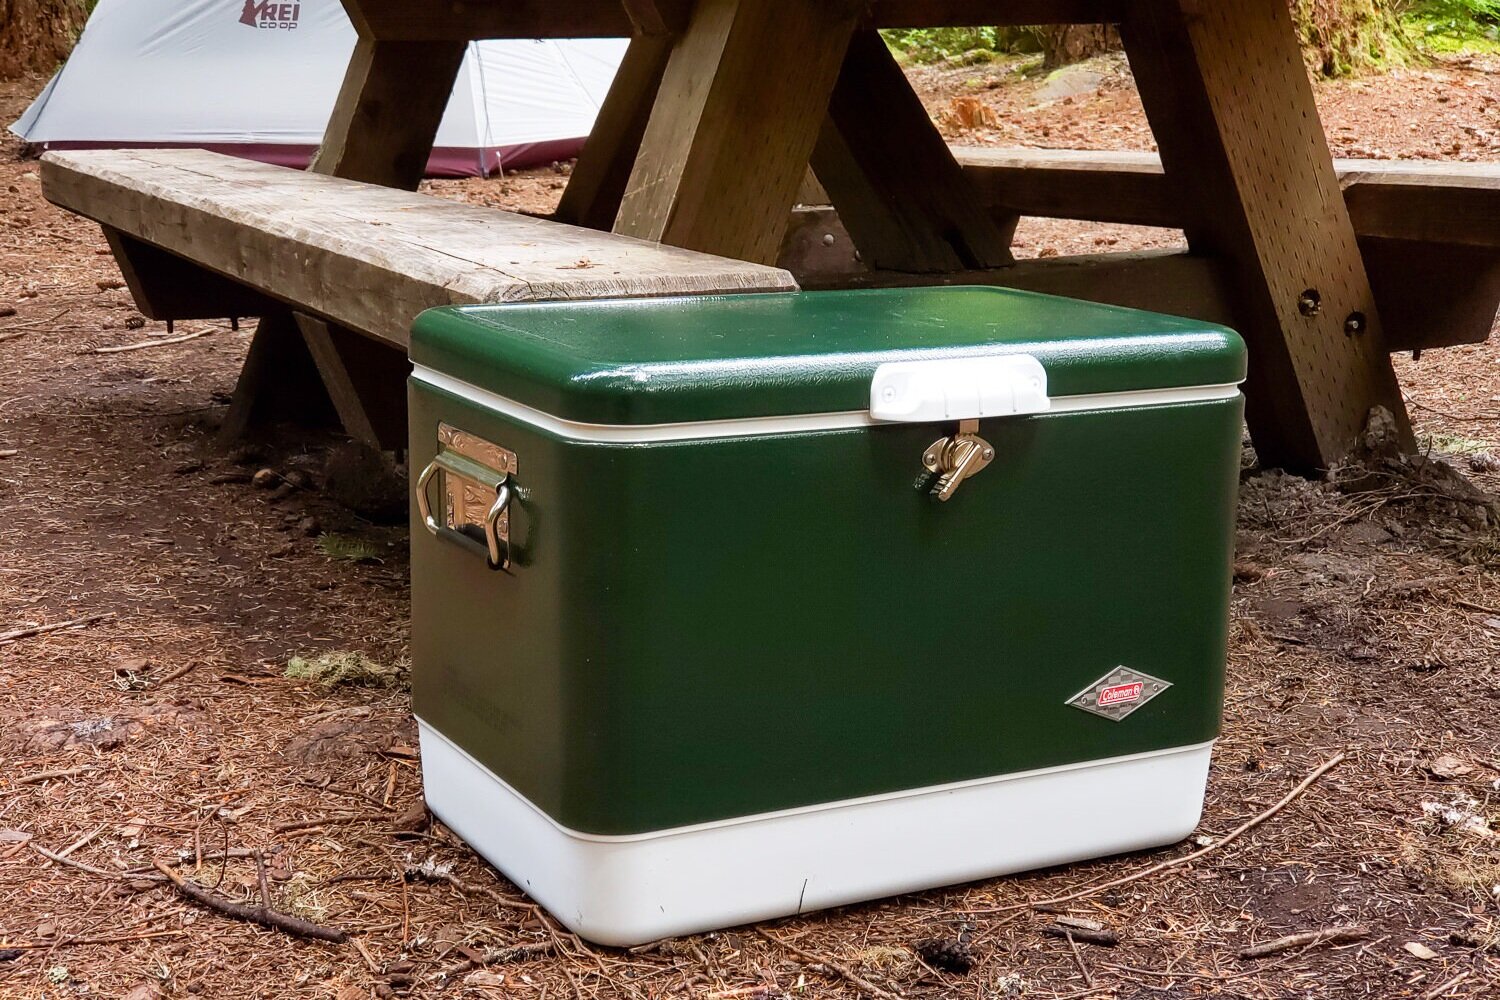 The Coleman Steel-Belted Cooler 54 Quart is has a classic metal exterior, a click-shut latch, and tons of interior space